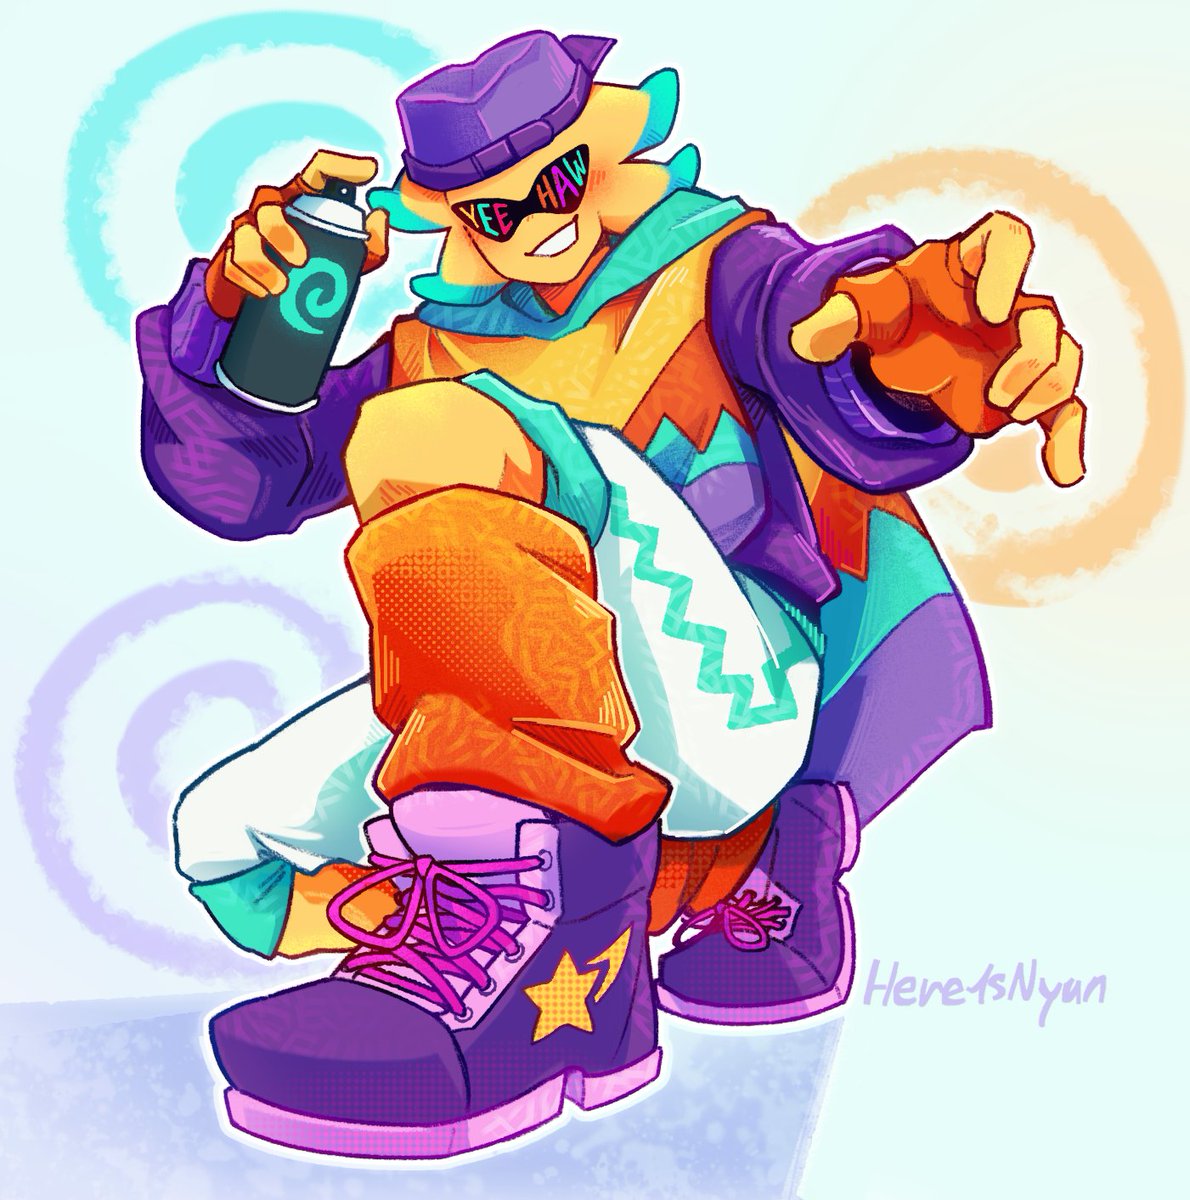 I really really like the Fresh!Starlo design I made a while ago, so here he is again 🧡 
He really likes graffiti art and b-boying 💥 I imagine after getting infected with Fresh he'd spray over the whole hideout-
[ #UndertaleYellow #Starlo ]